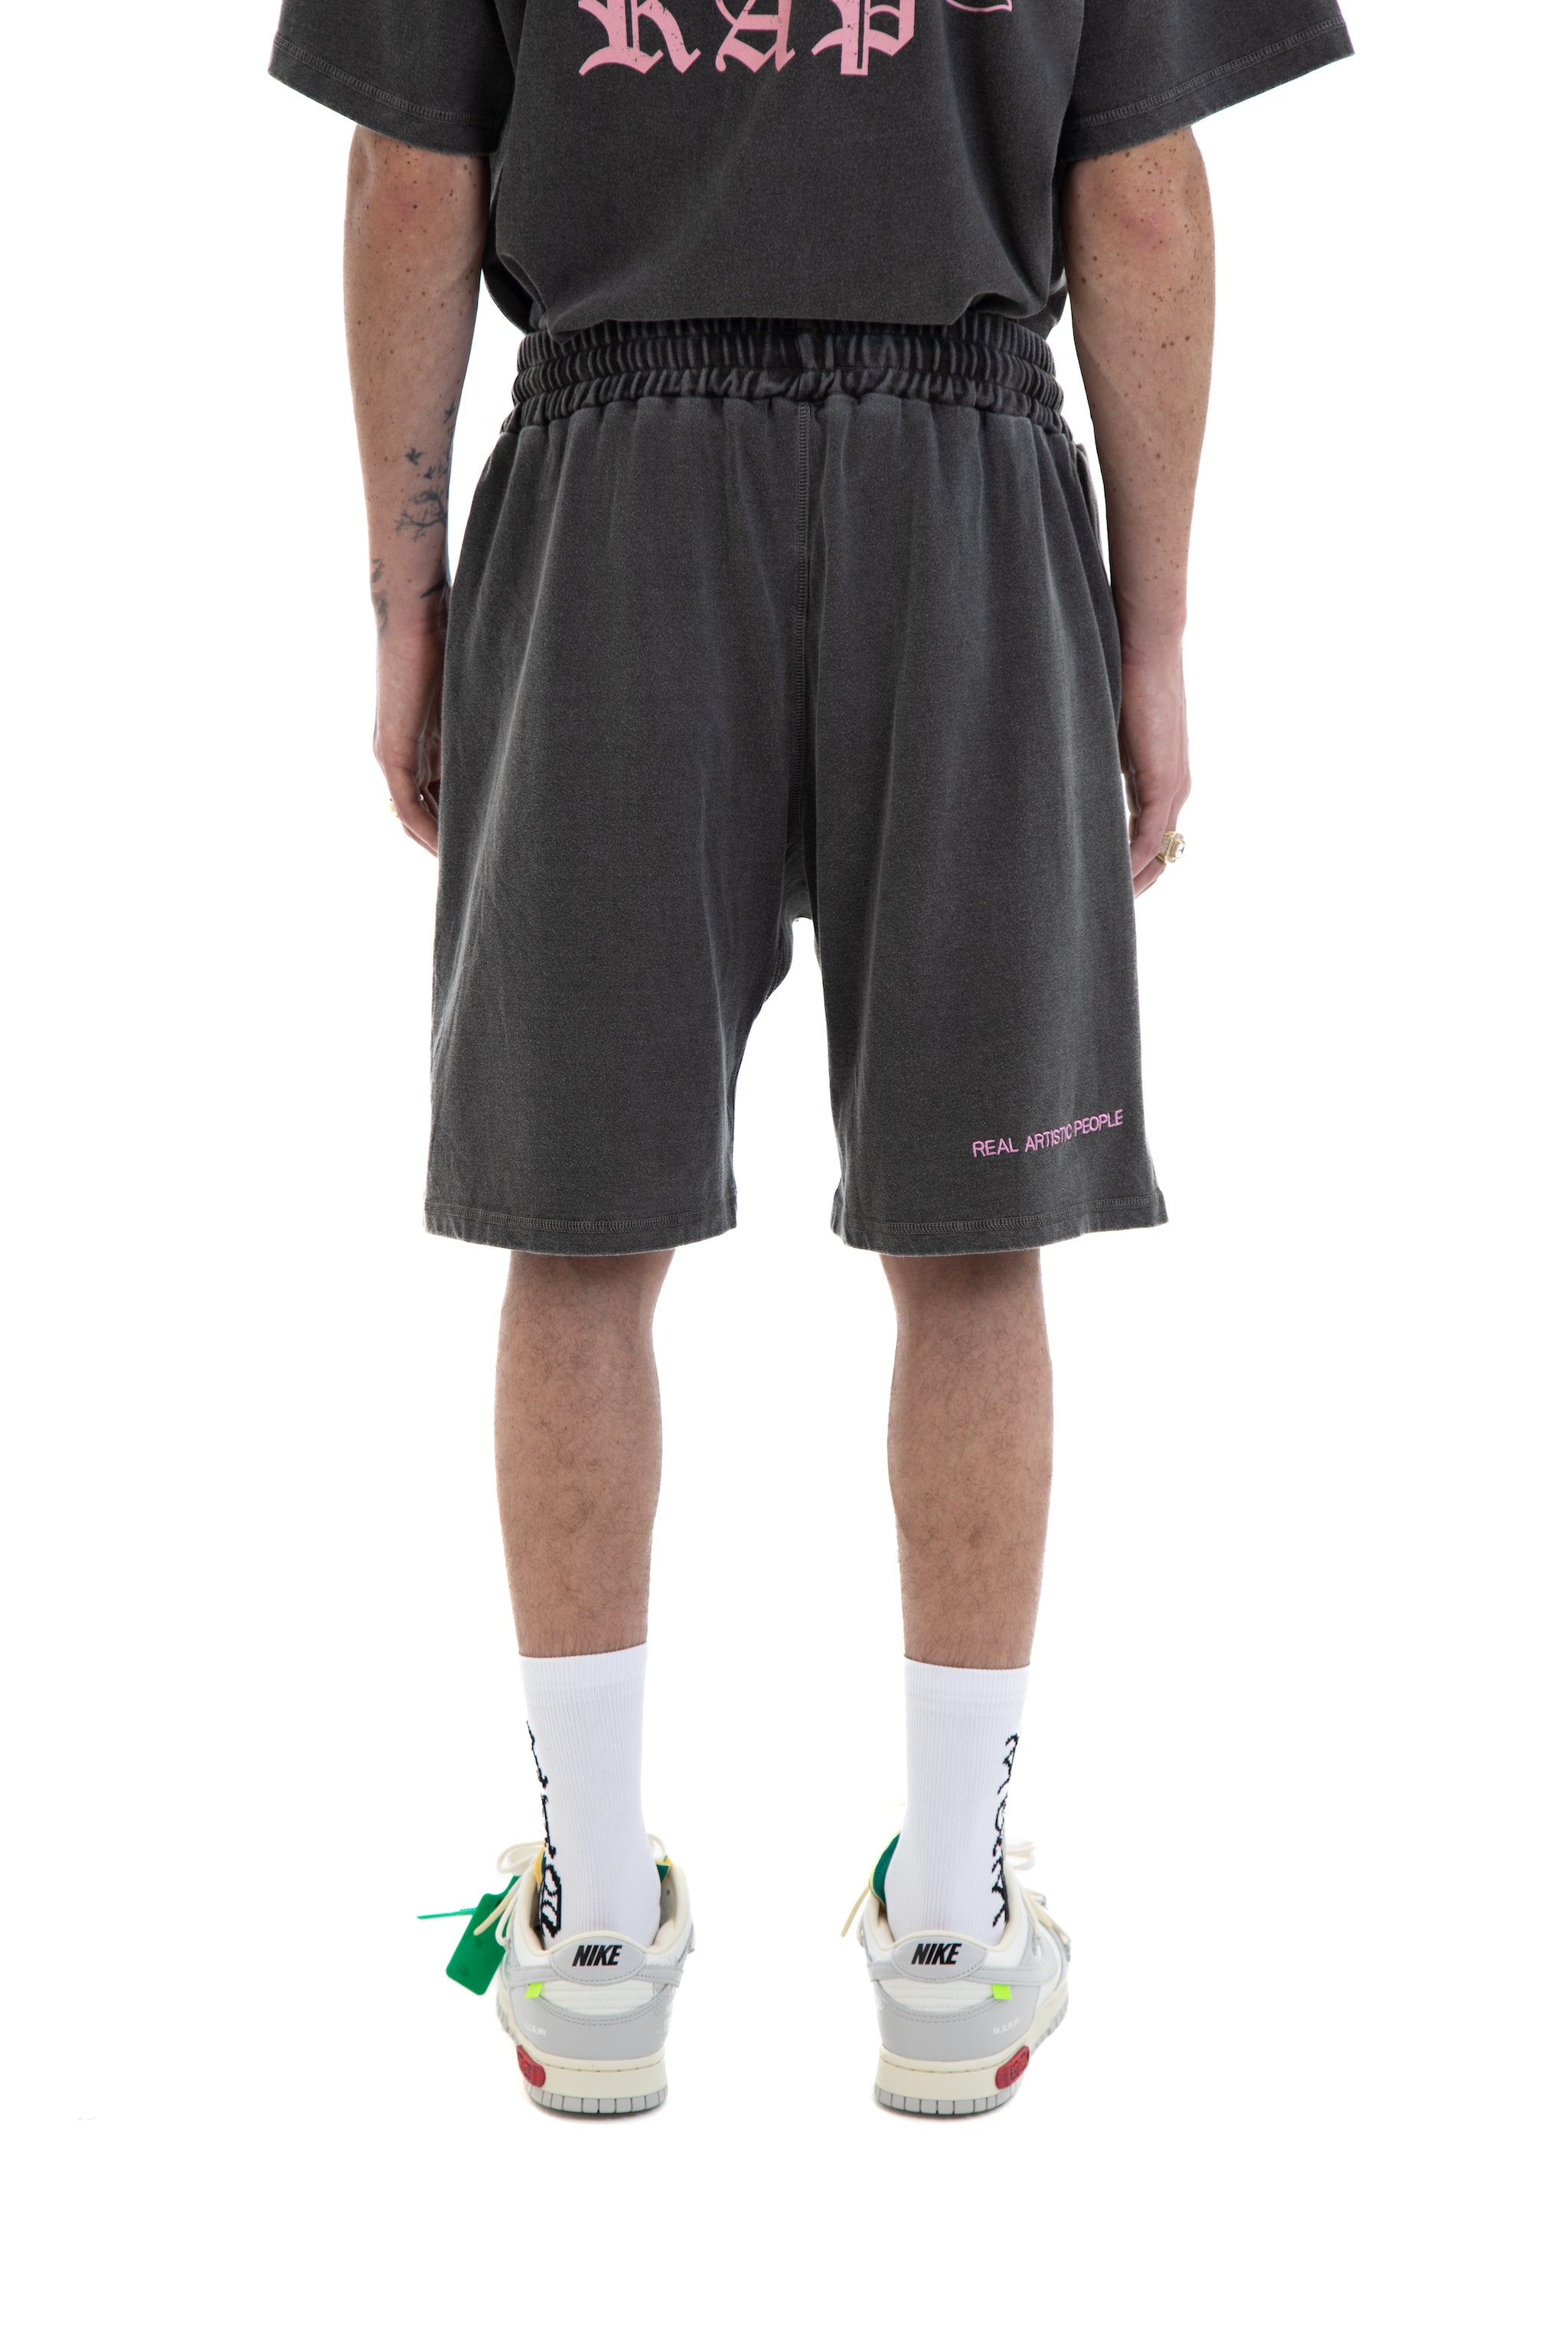 Heir Oversized Shorts - Charcoal Grey